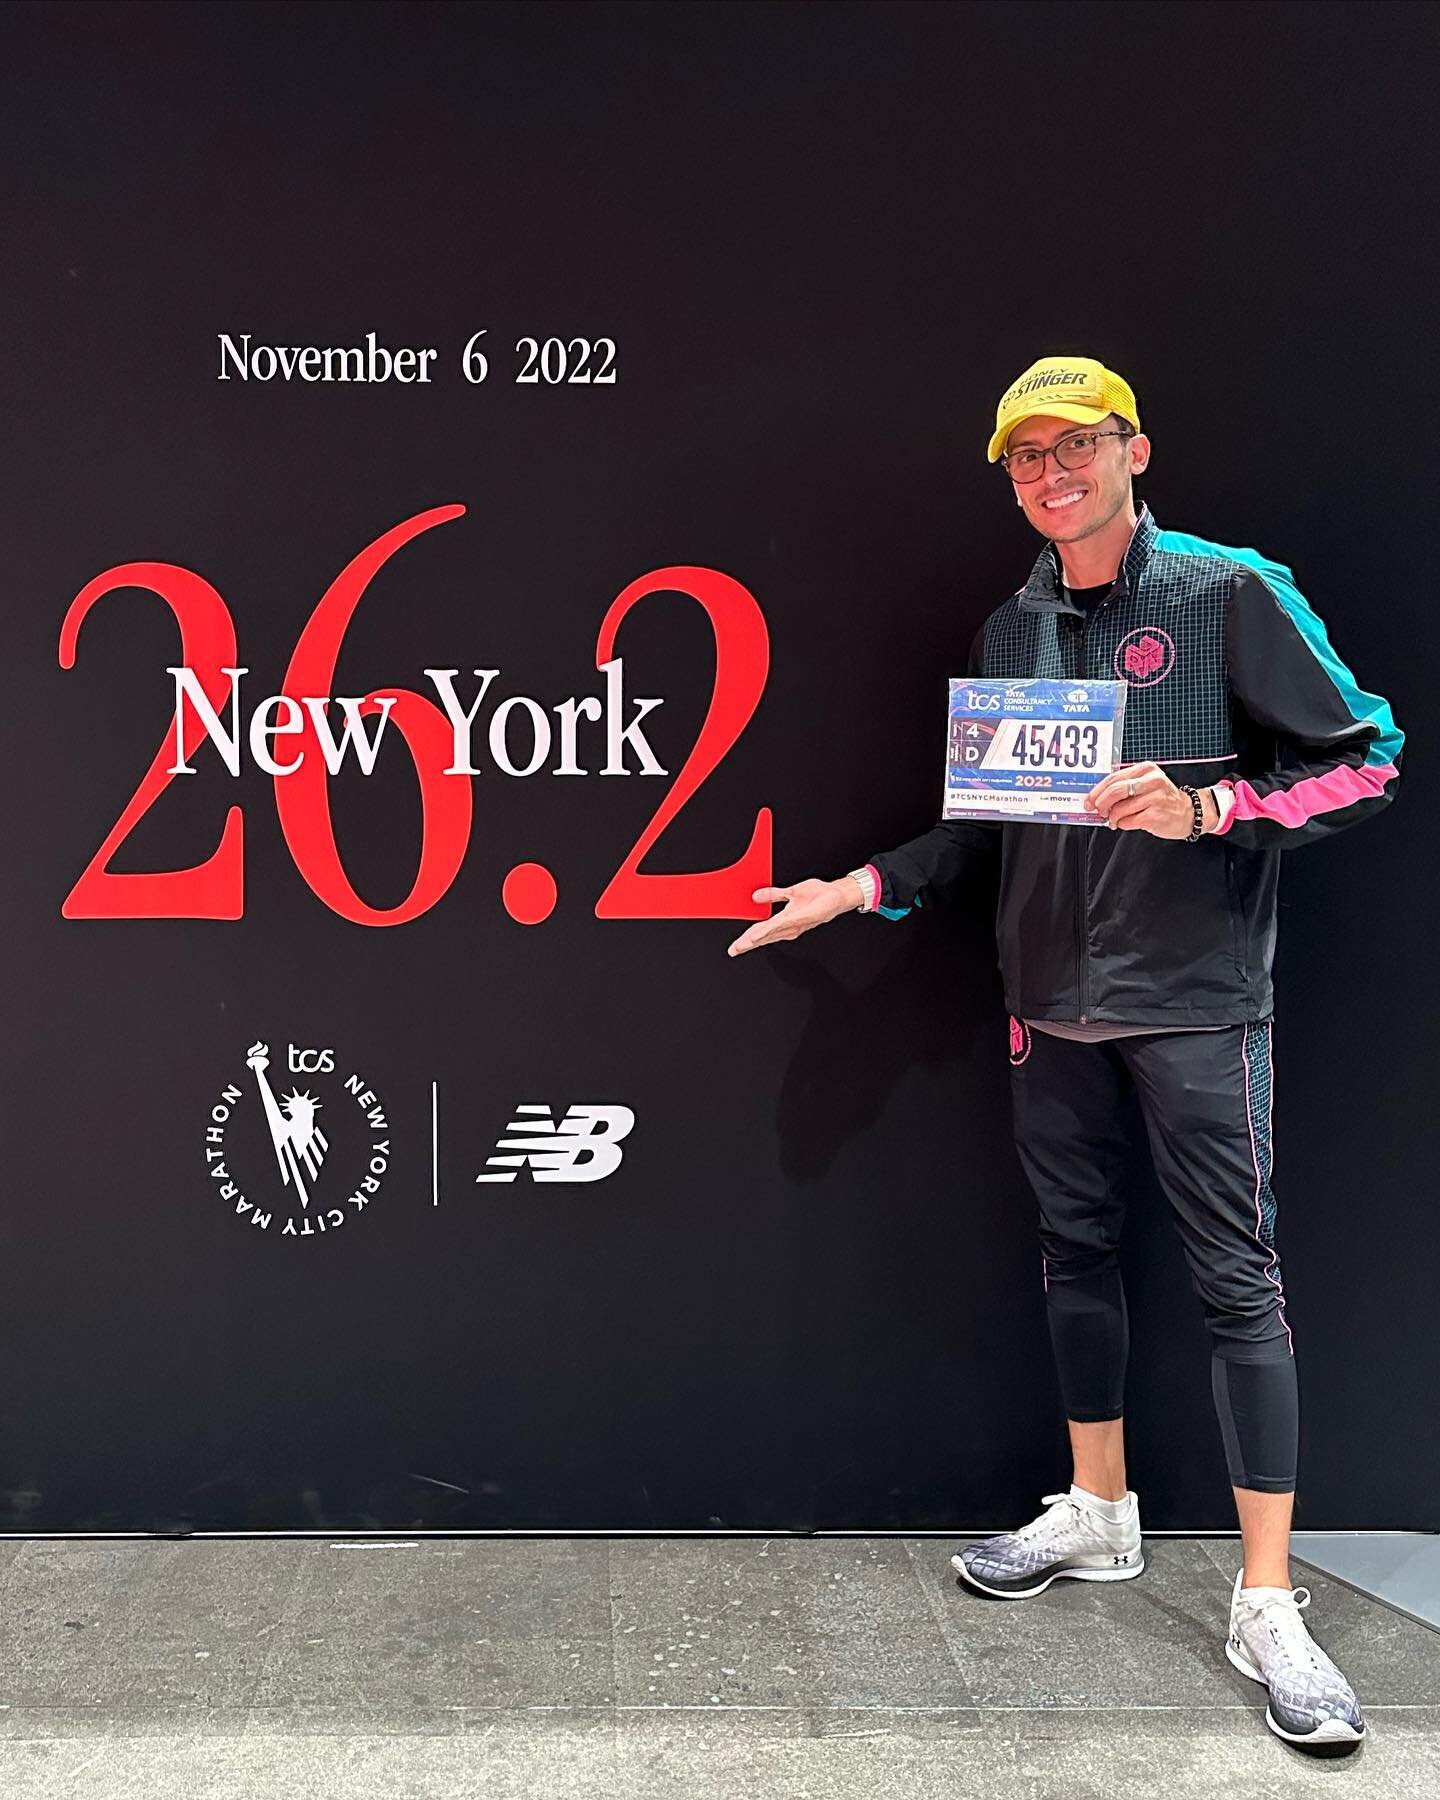 1/4 @nycmarathon recap!

Adventures began on Race Saturday with a trip from Las Vegas to NYC. 

The weather was exemplary (especially for November) which made traversing the city a treat.

Speaking of treats, the day was full of snacking, pre race ca